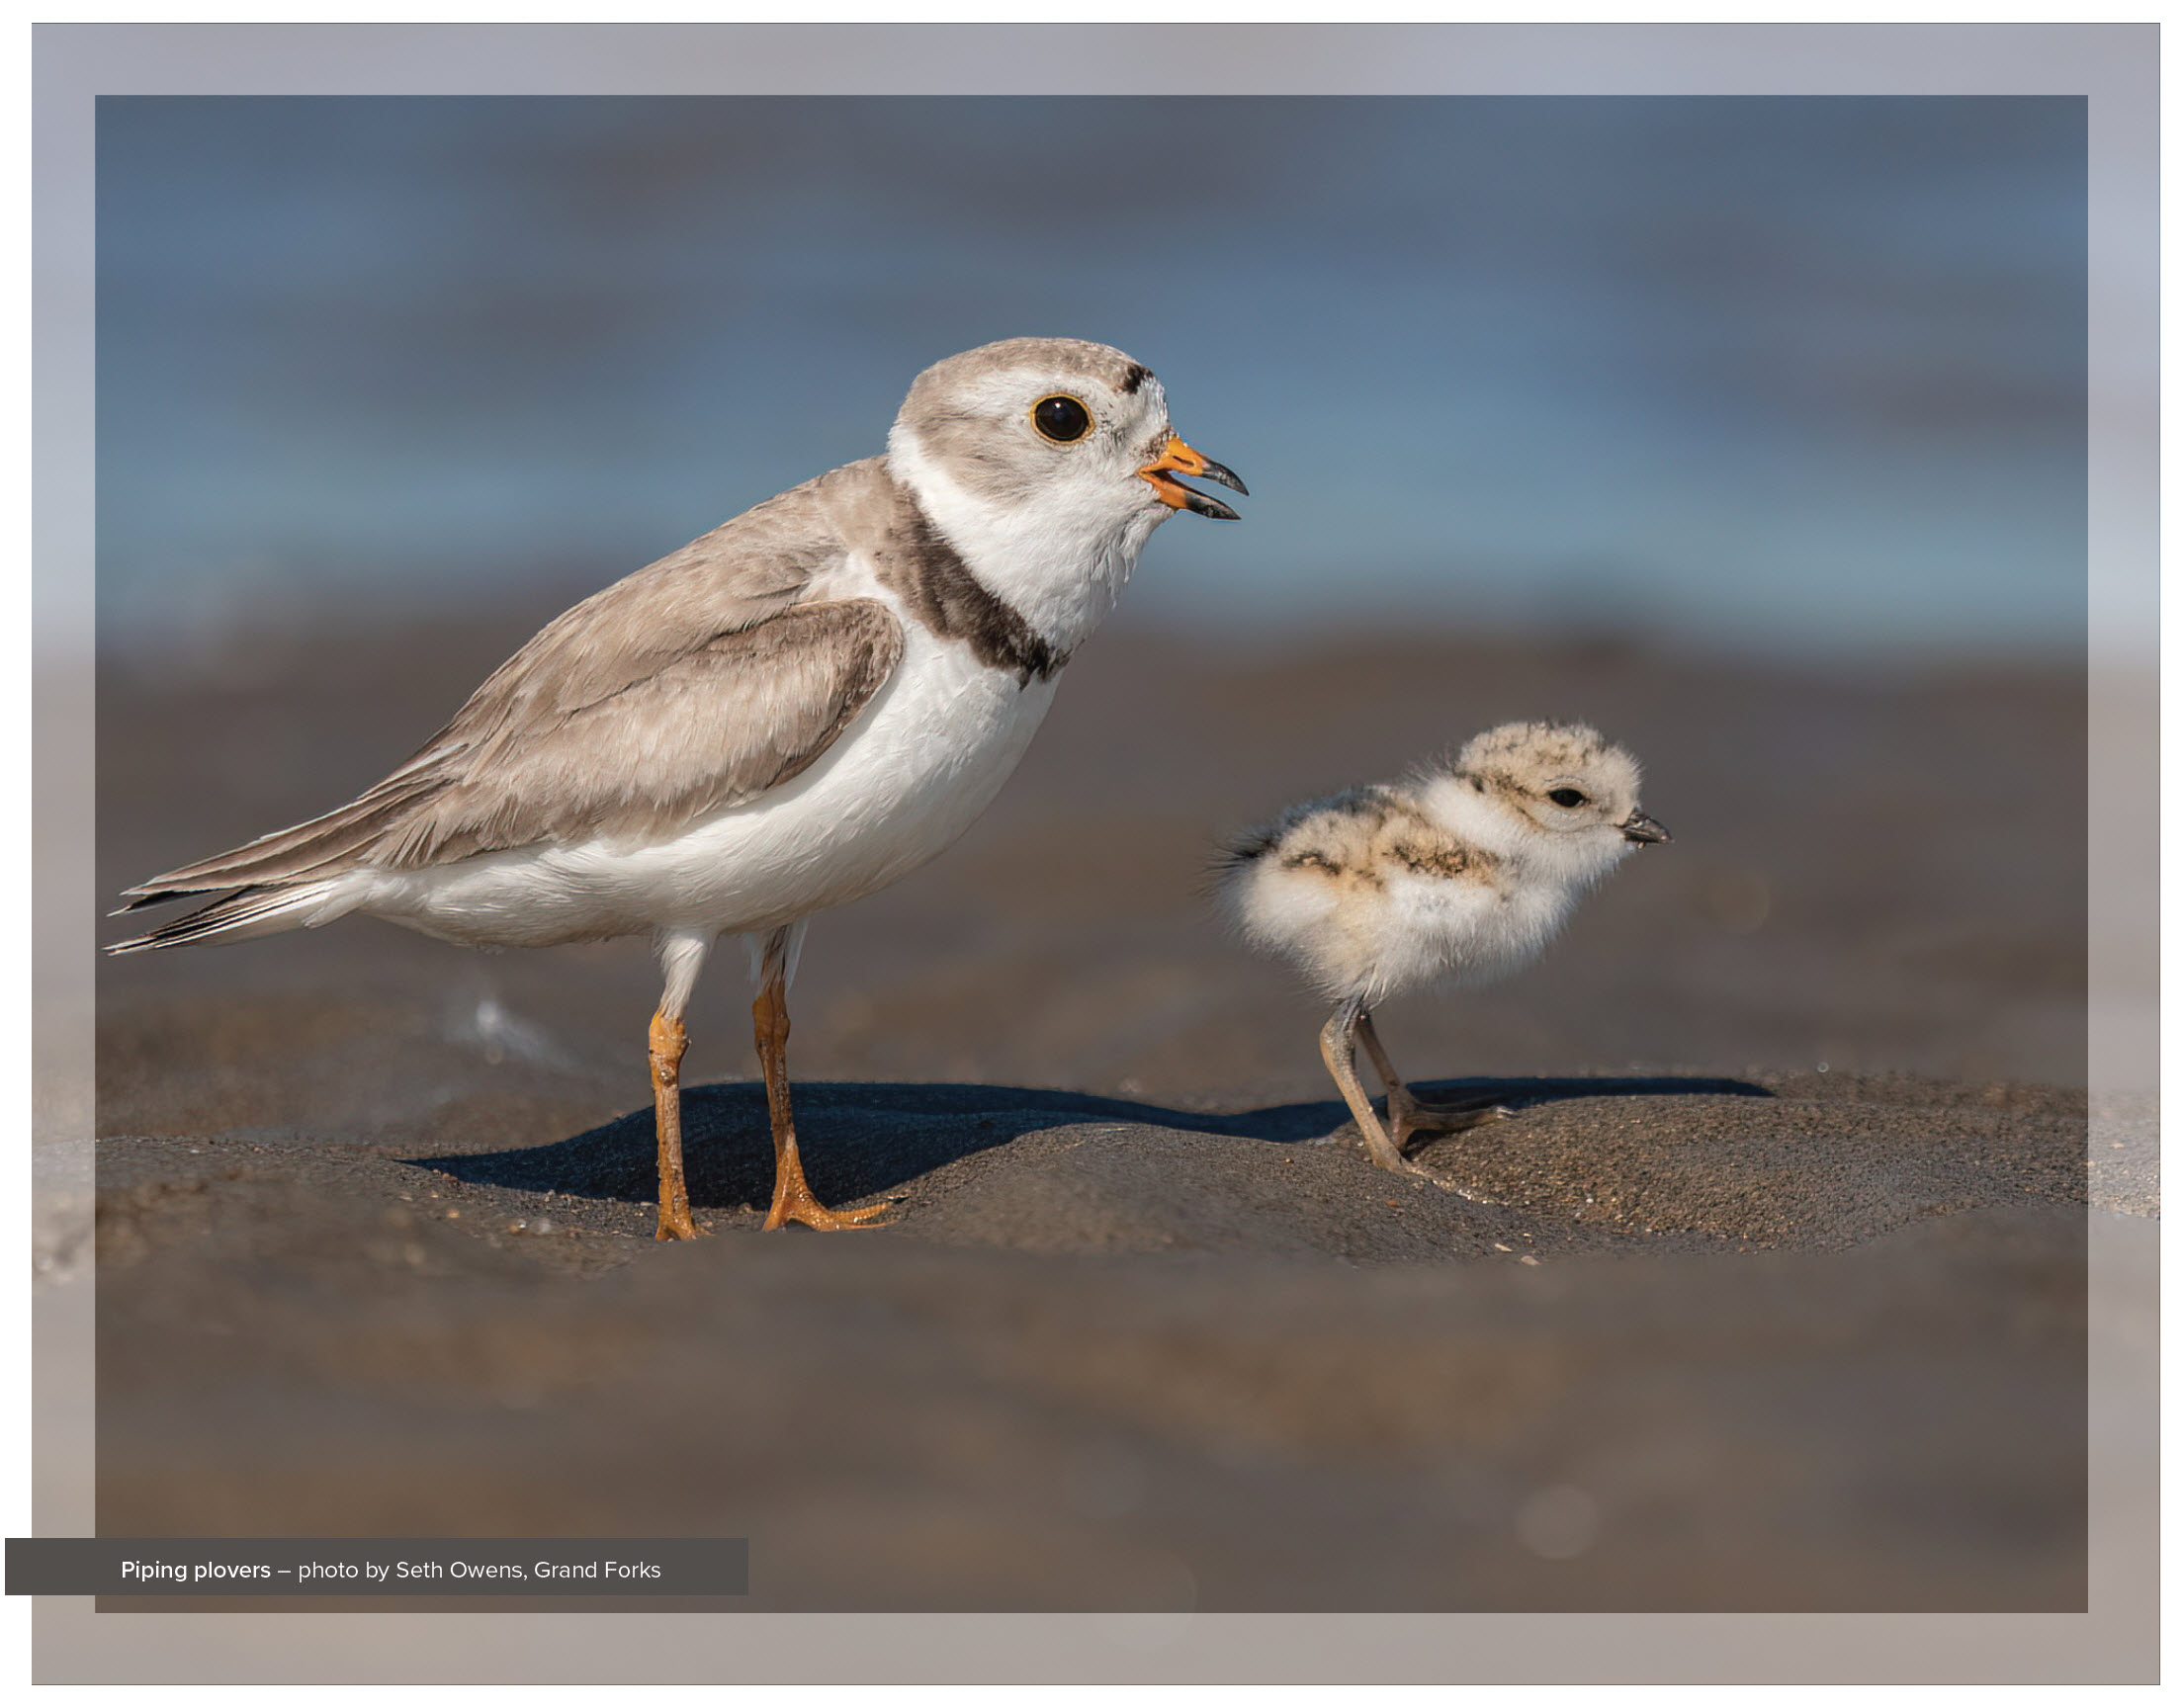 Piping plovers taken by Seth Owens